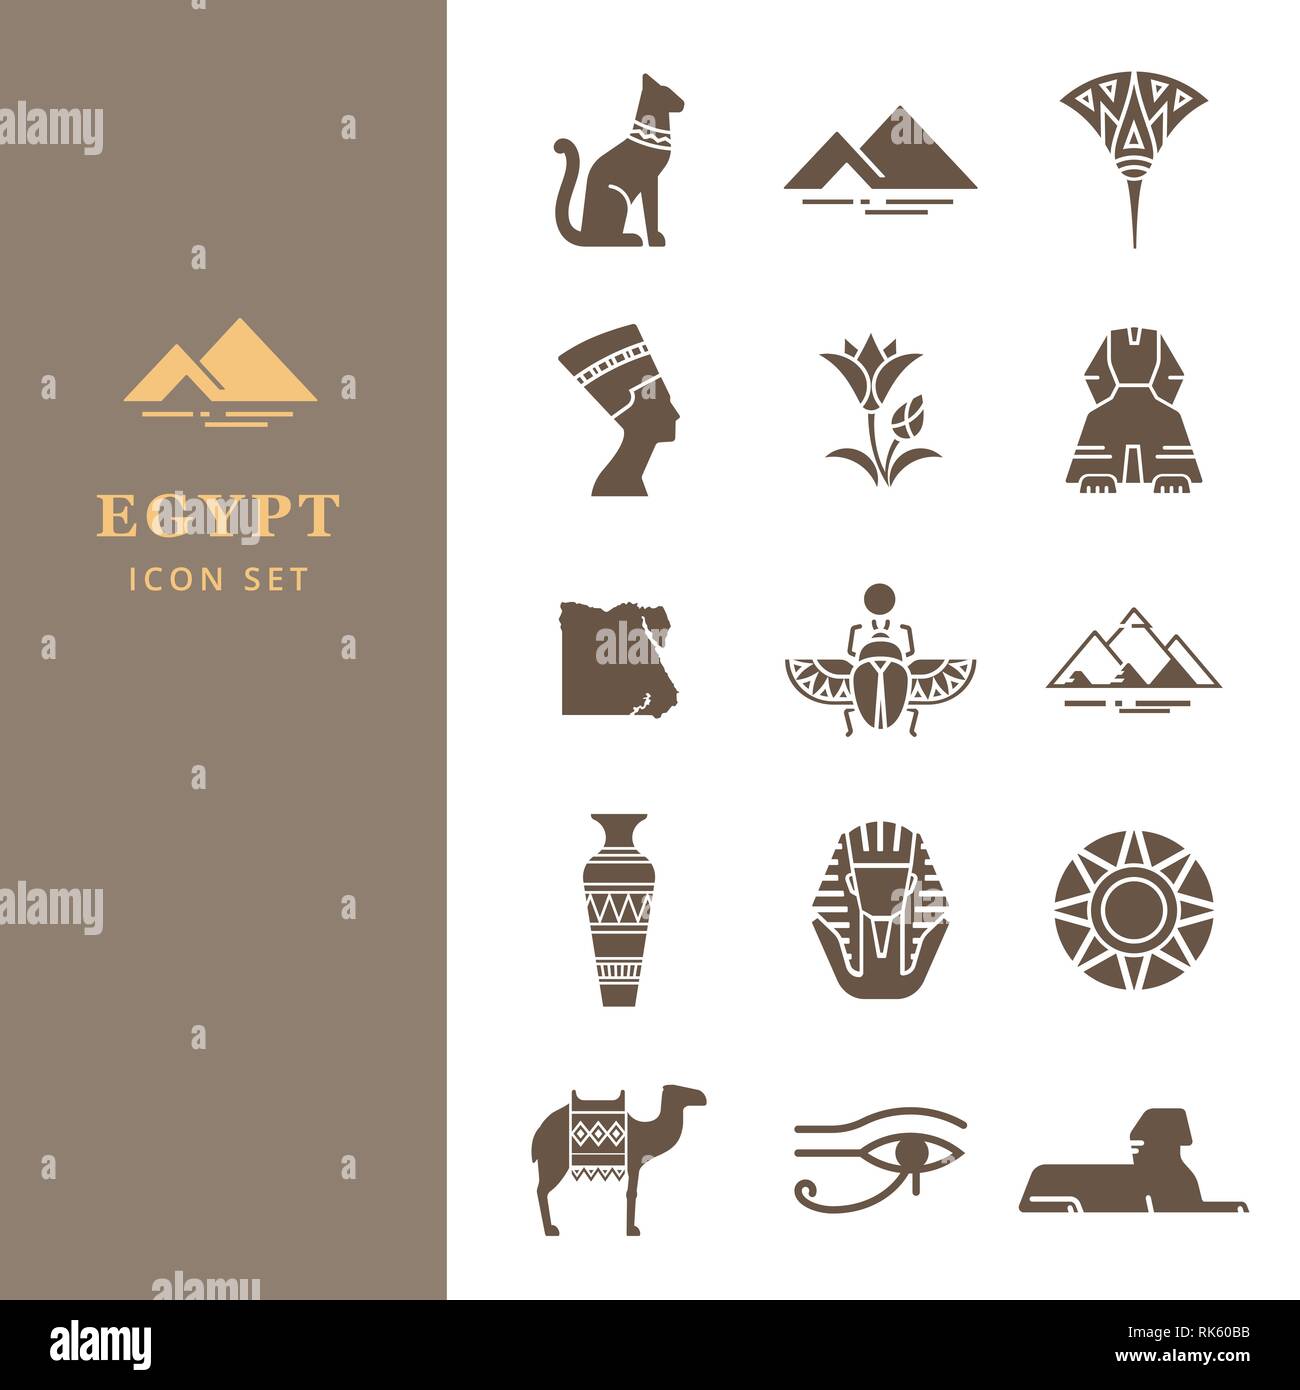 Egyptian icon set for a logo, website design, printing products ...